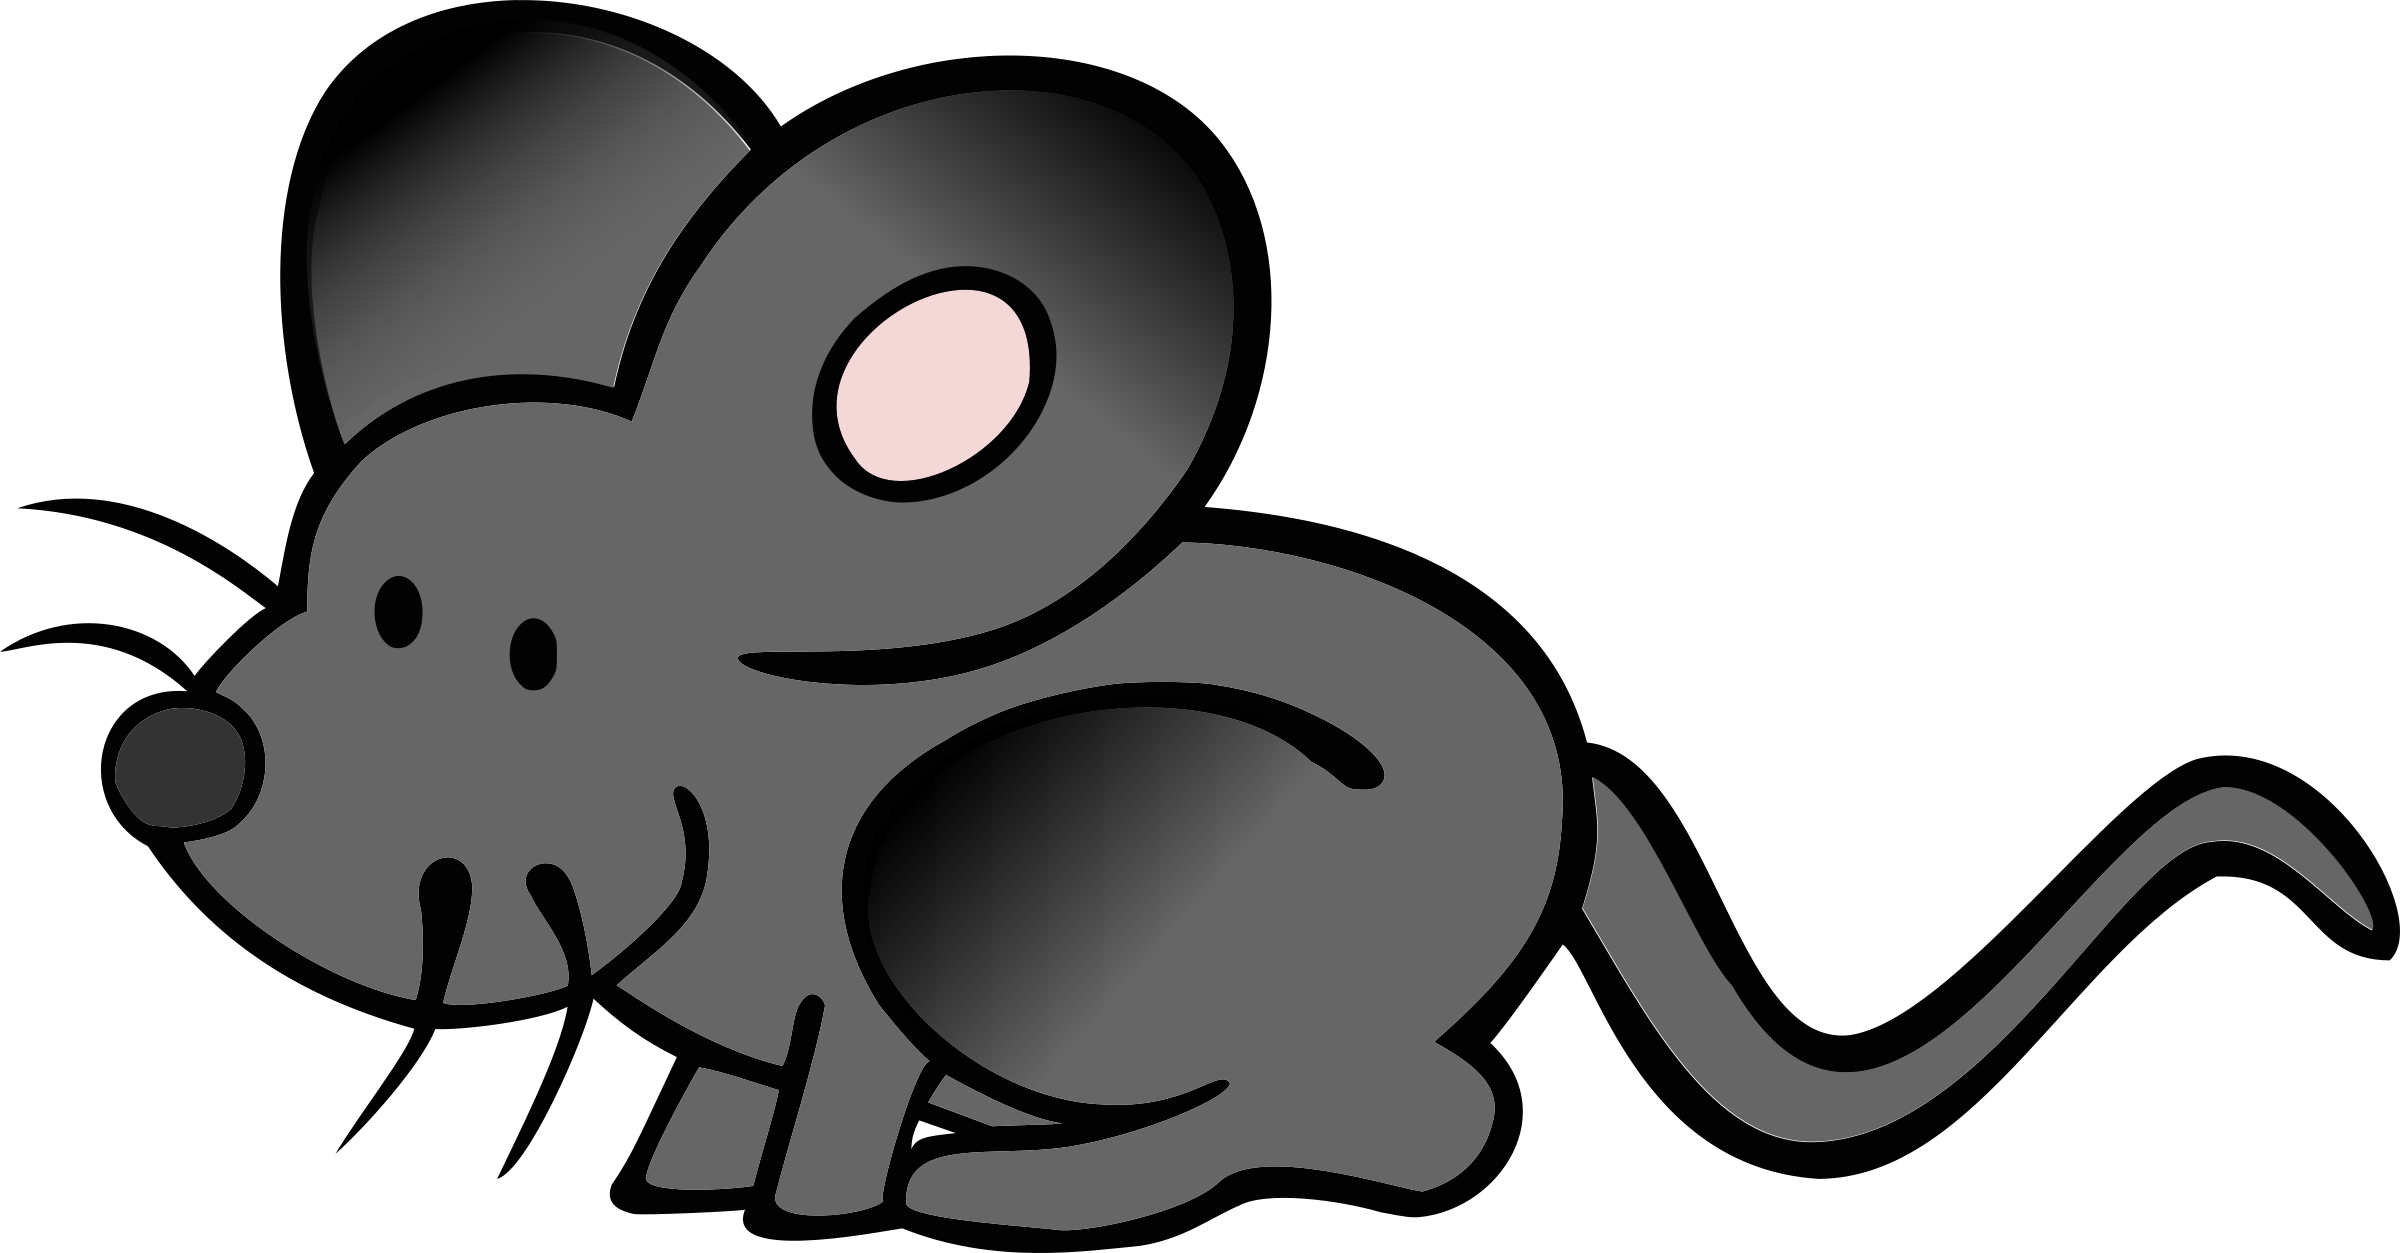 Cartoon mouse image group. Nature clipart animal